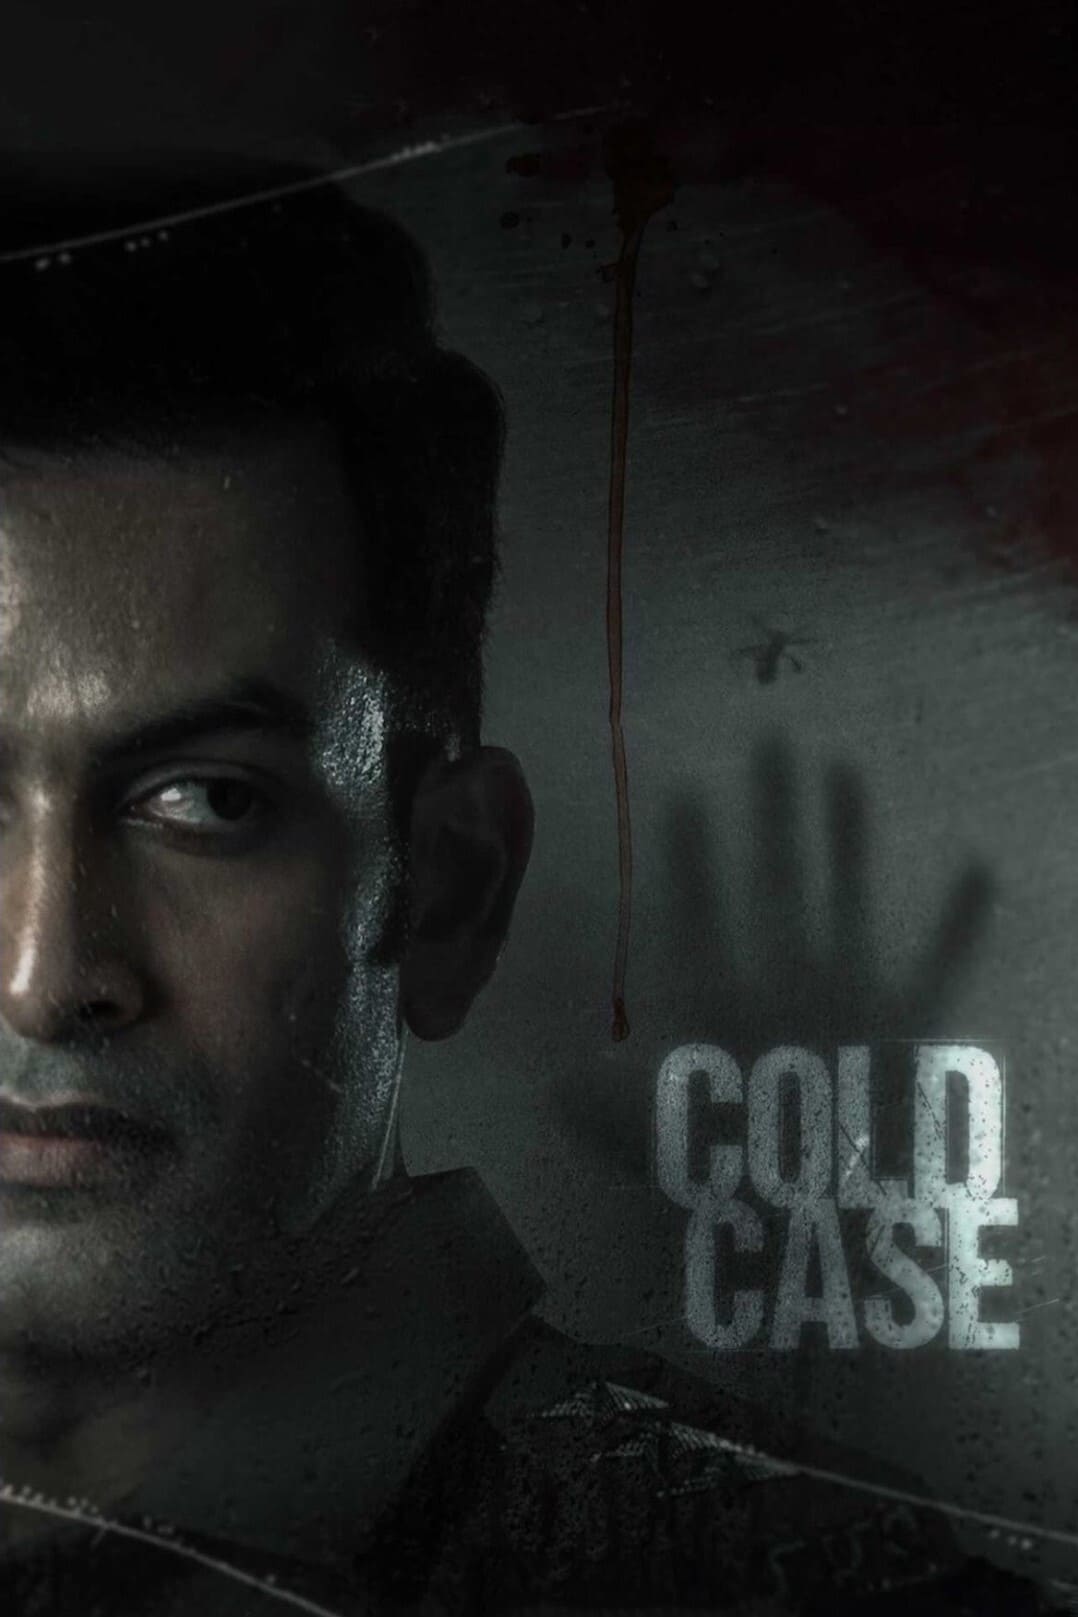 Poster for the movie "Cold Case"